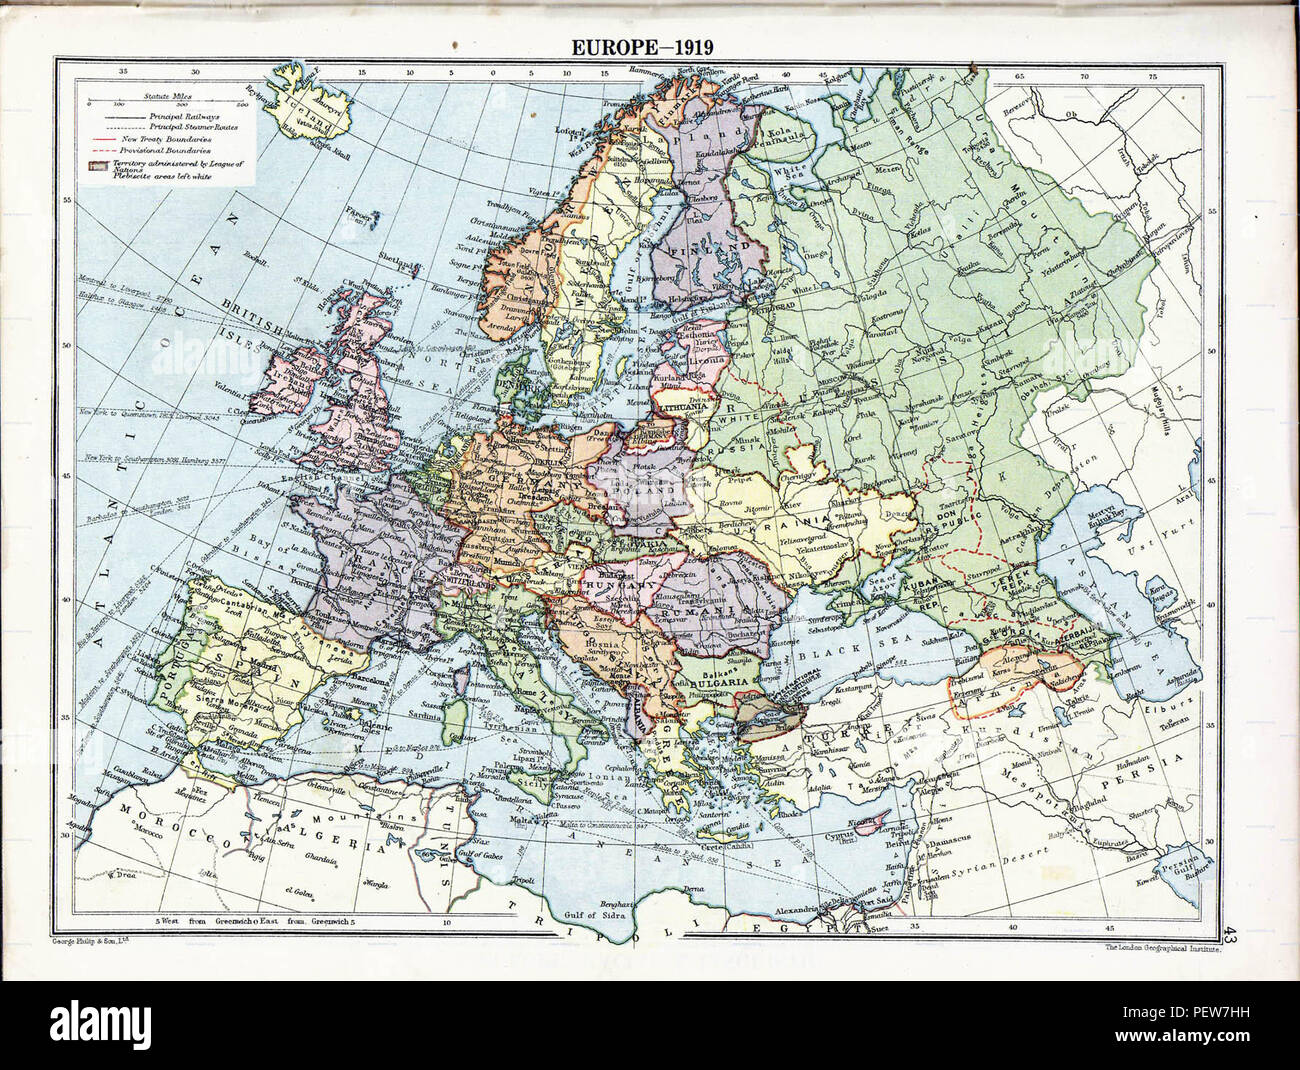 London Geographical Institute's 1919 map of Europe after the treaties of Brest-Litovsk and Batum and before the treaties of Tartu, Kars, and Riga Stock Photo